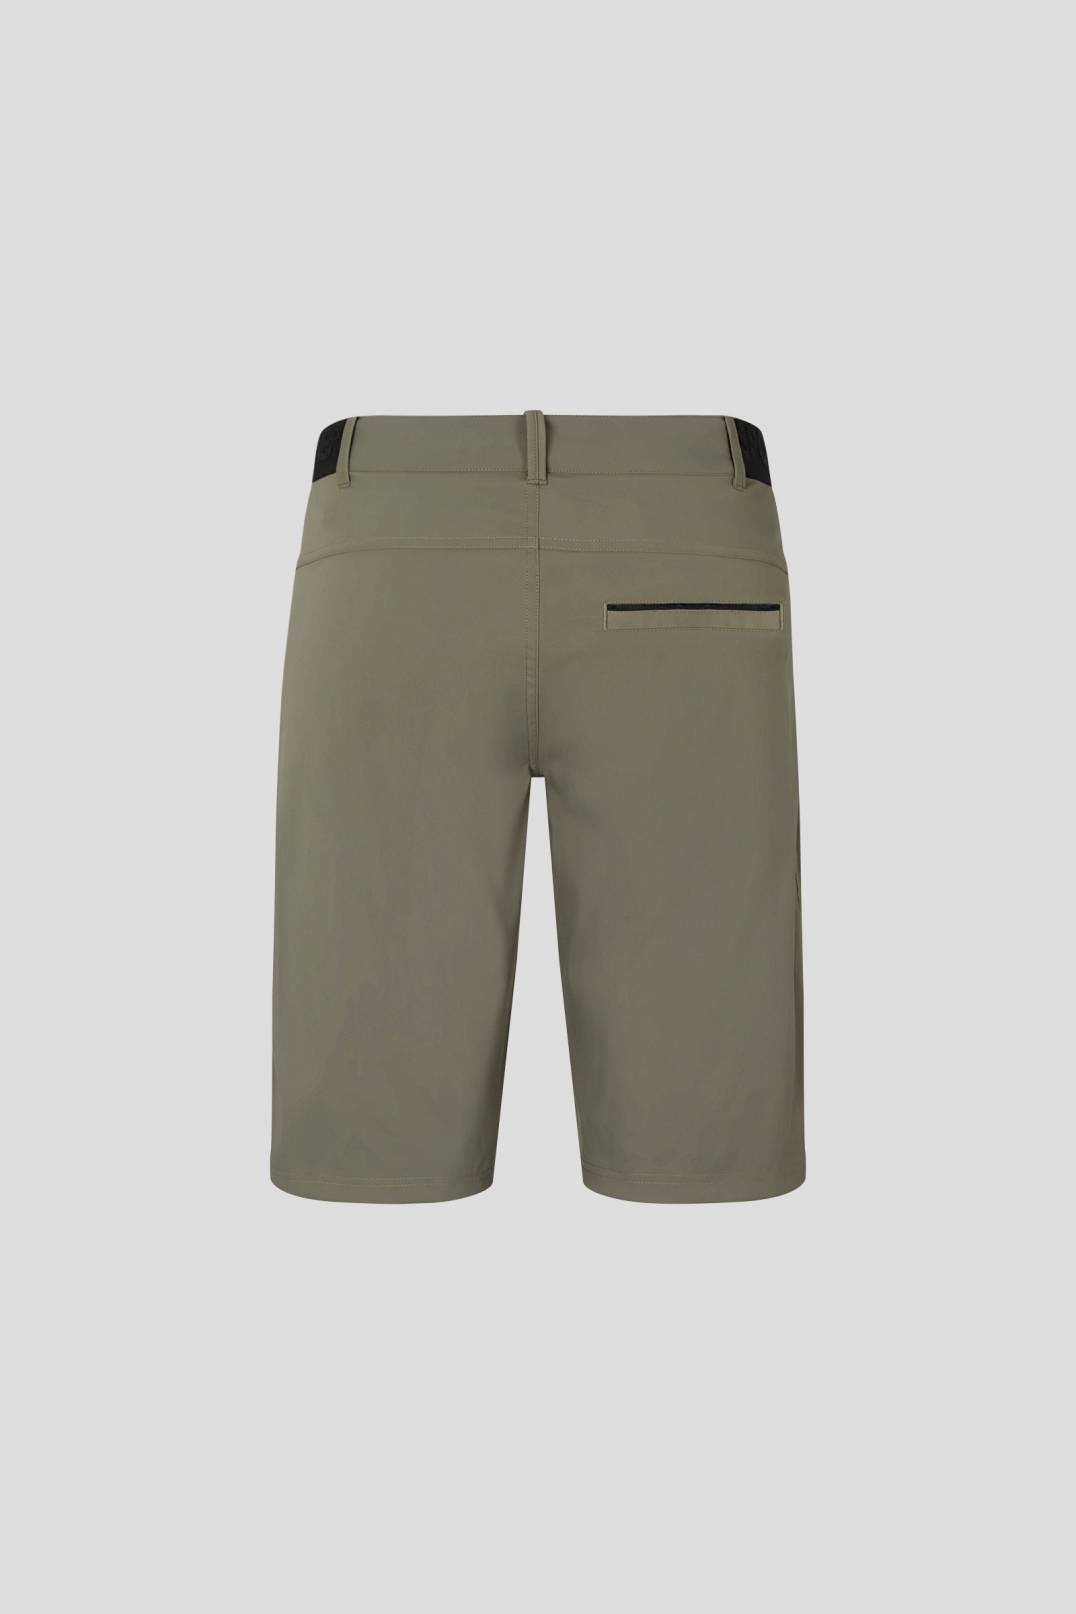 COLVIN FUNCTIONAL SHORTS IN OLIVE GREEN - 6